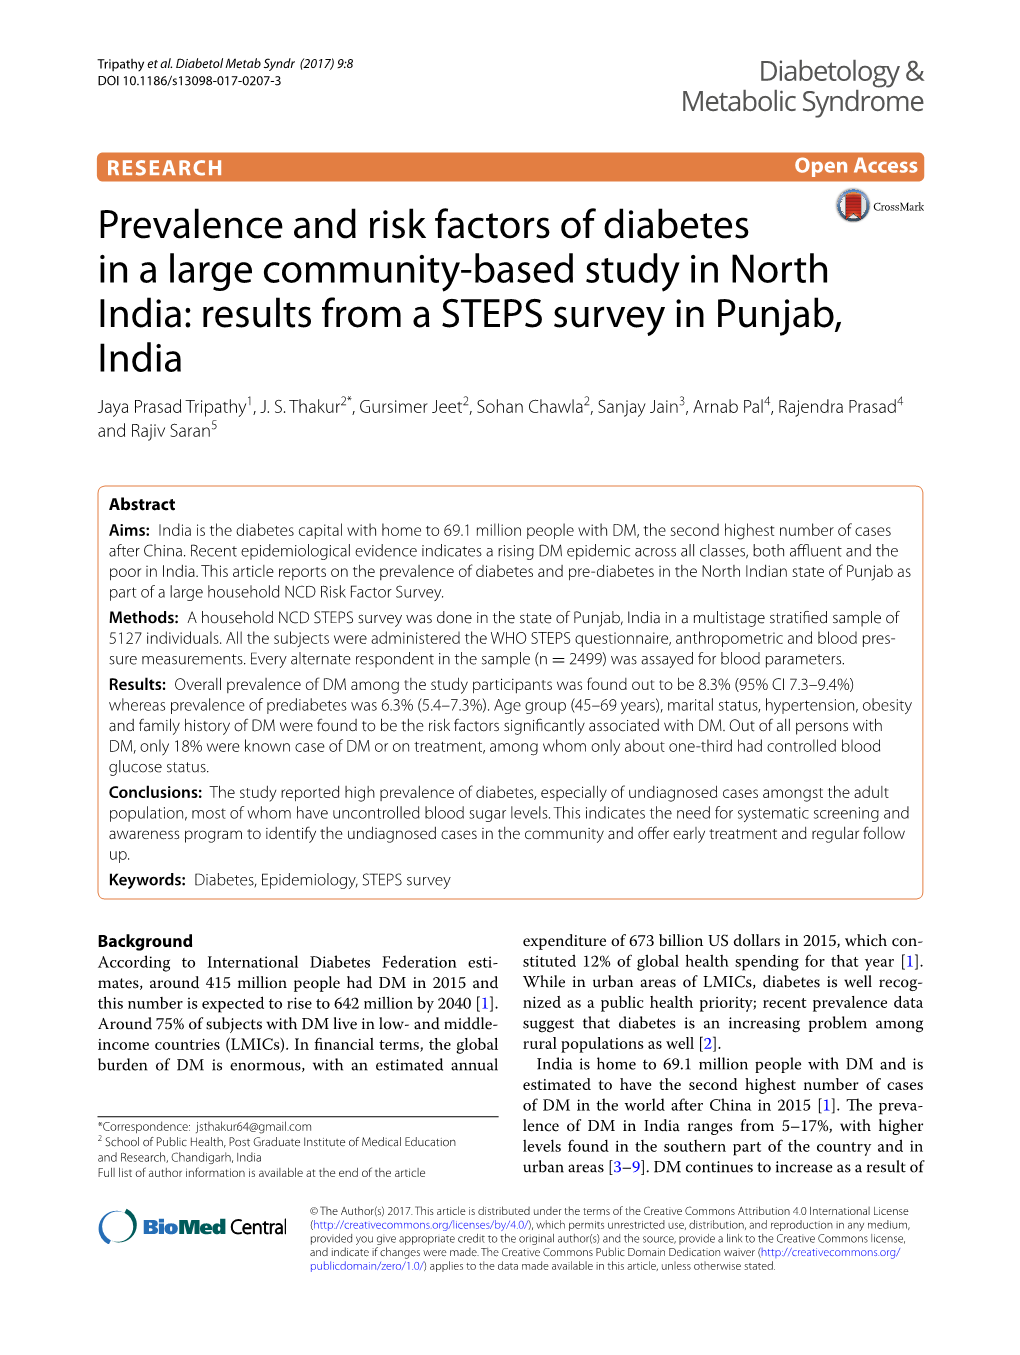 Prevalence and Risk Factors of Diabetes in a Large Community‑Based Study in North India: Results from a STEPS Survey in Punjab, India Jaya Prasad Tripathy1, J